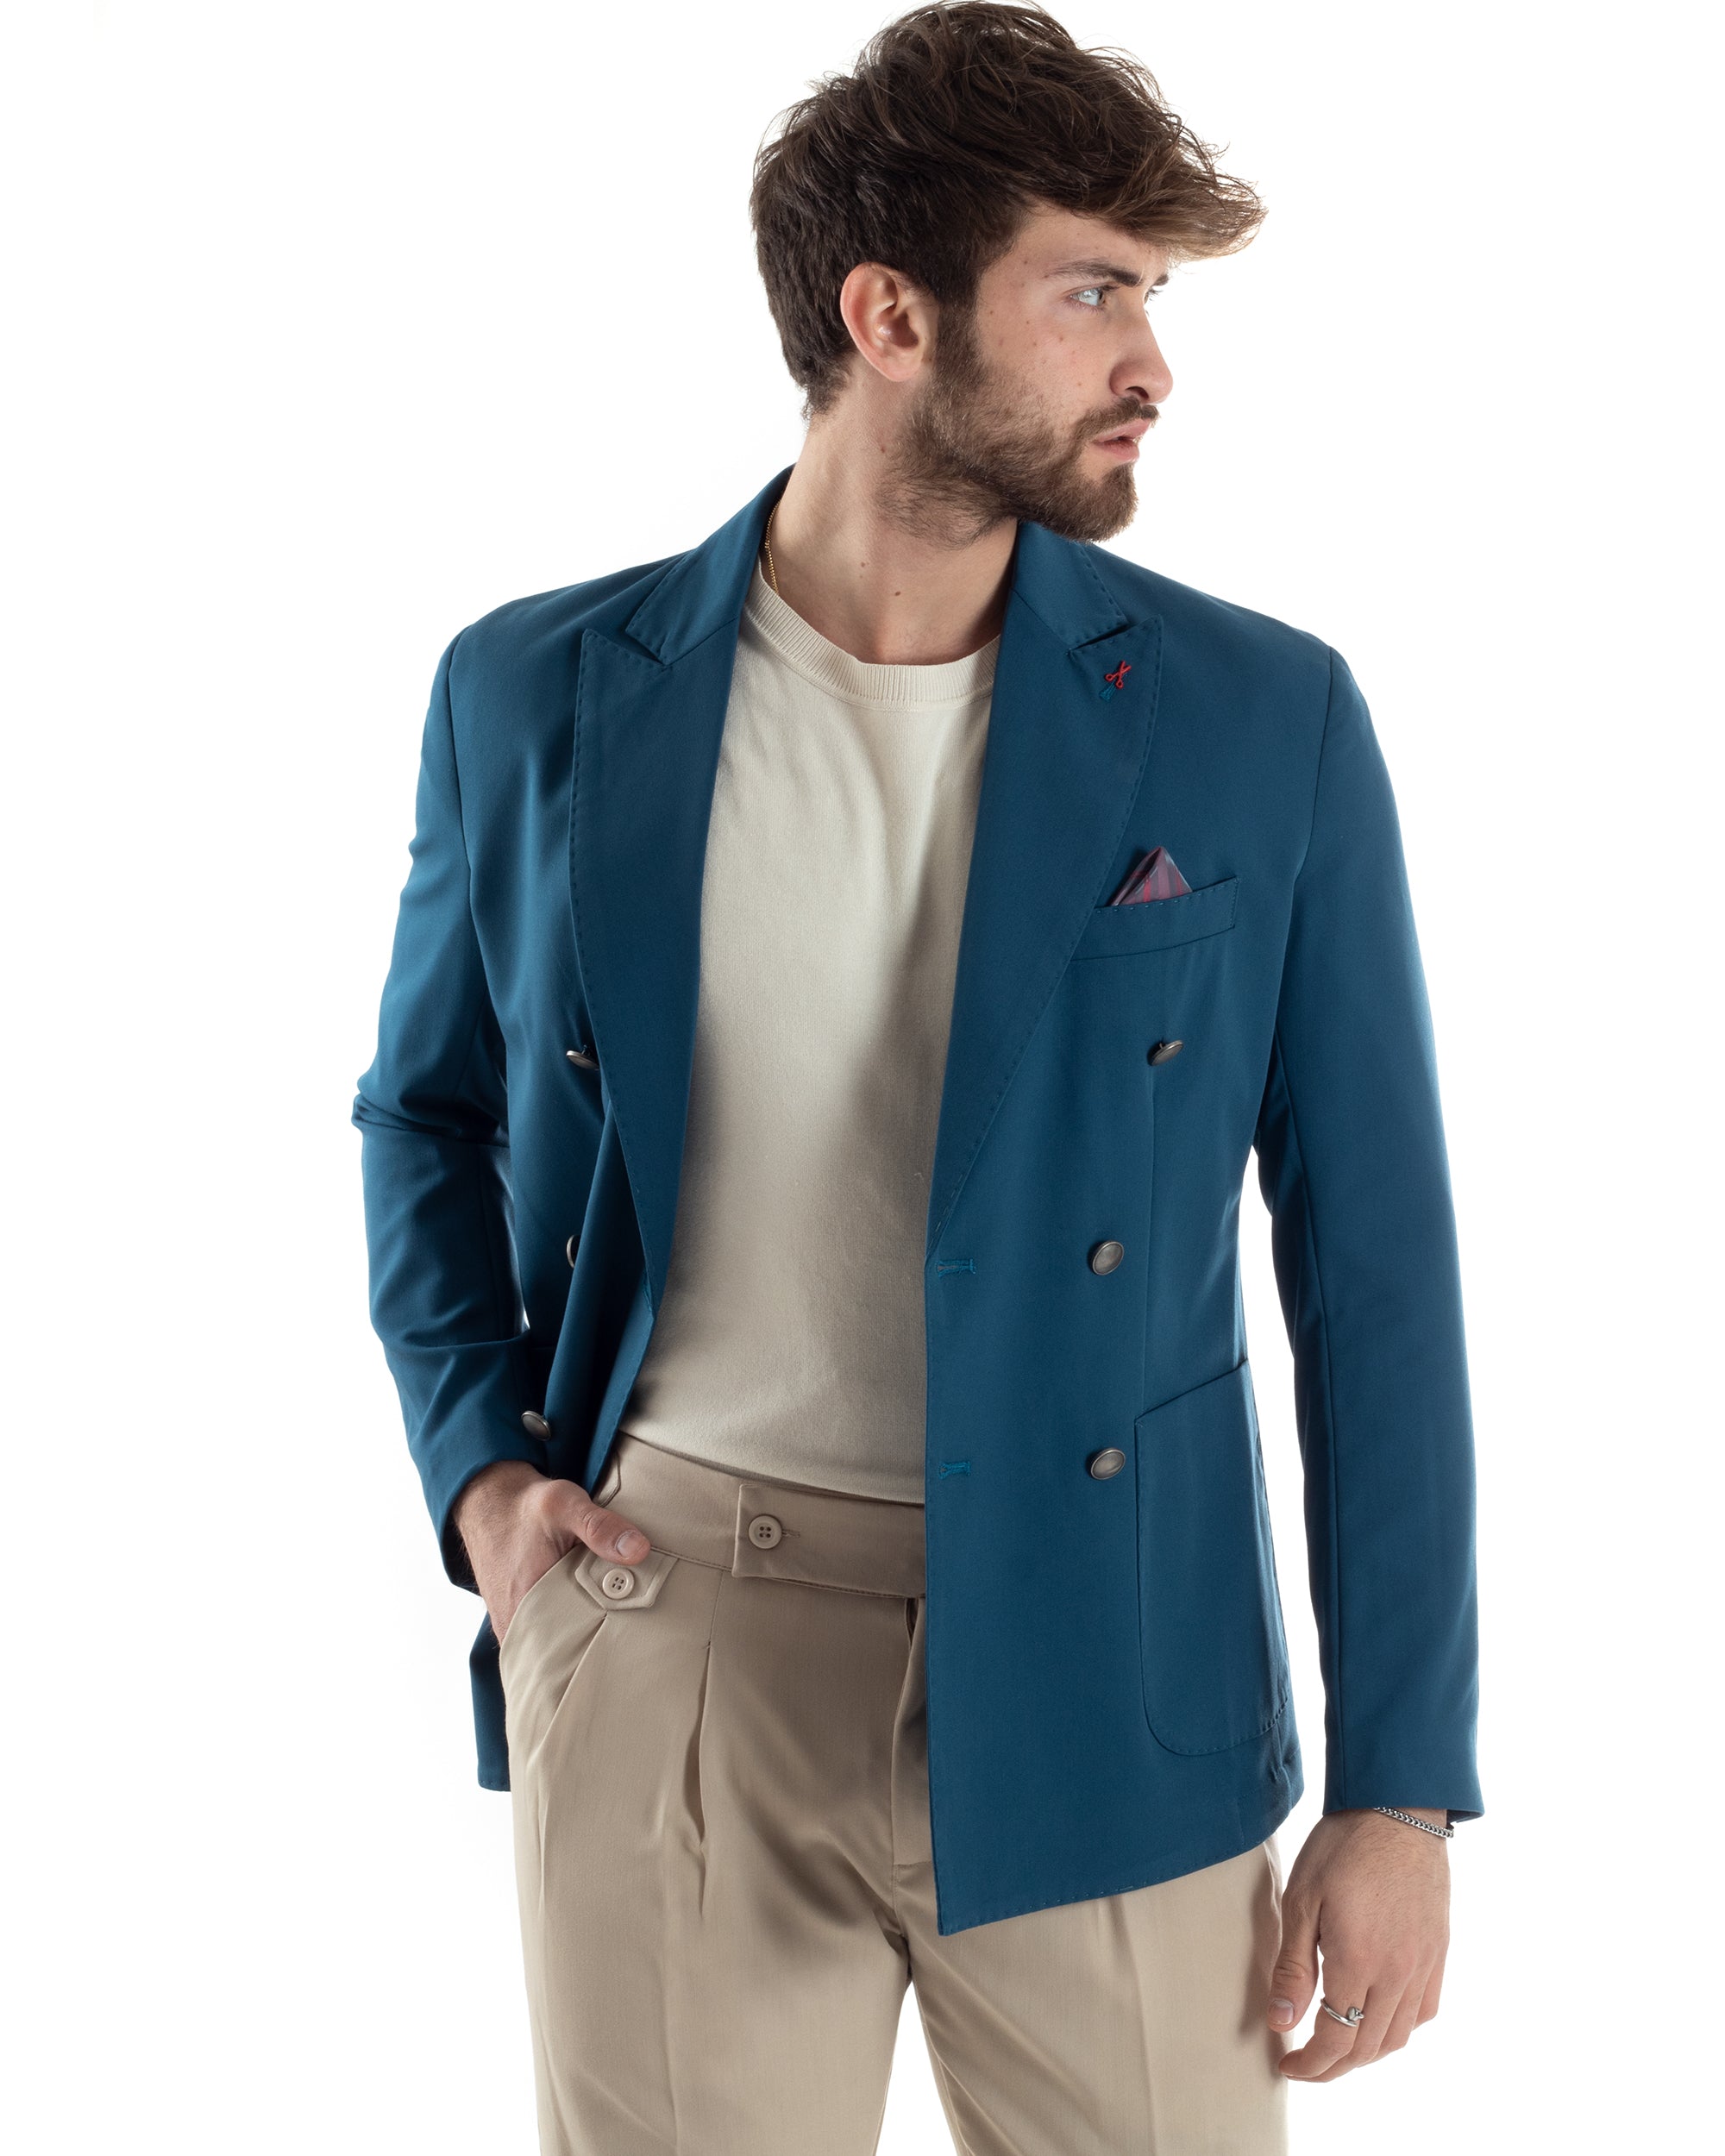 Men's Double-Breasted Linen Jacket Solid Color Blue Tailored Ceremony Elegant Casual GIOSAL-G3062A